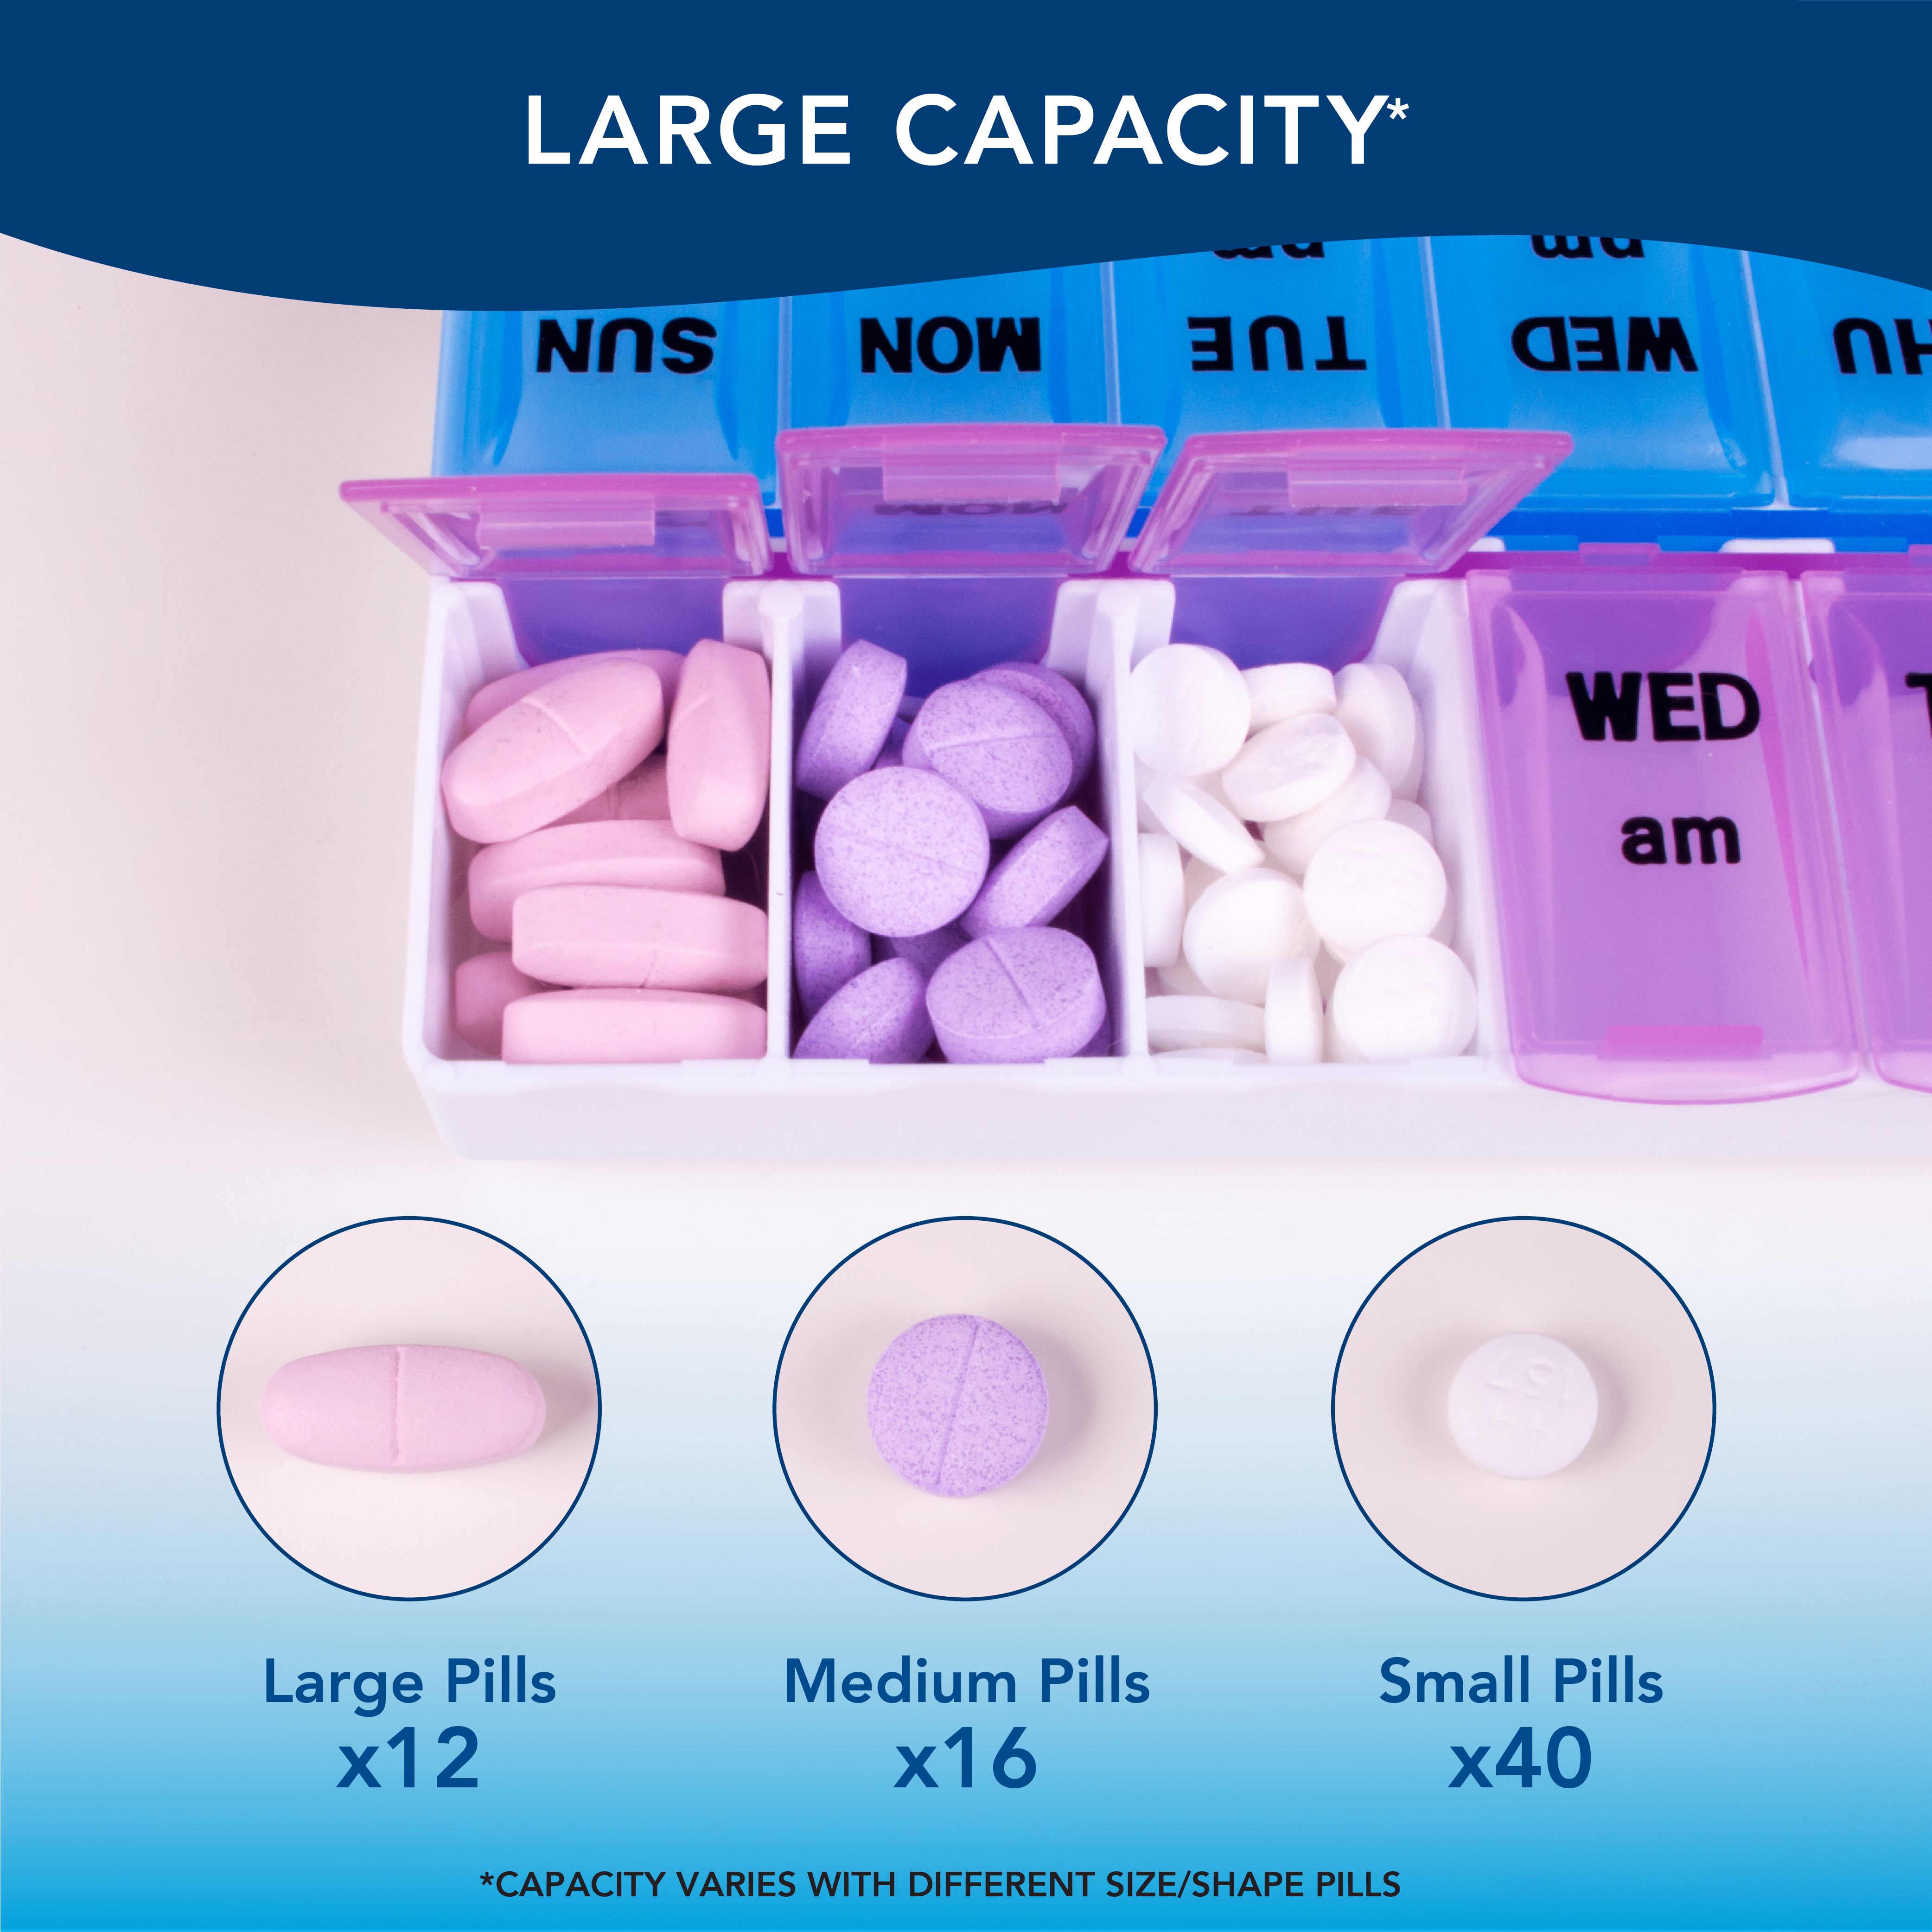 Monthly Pill Organizers in Pill Organizers 